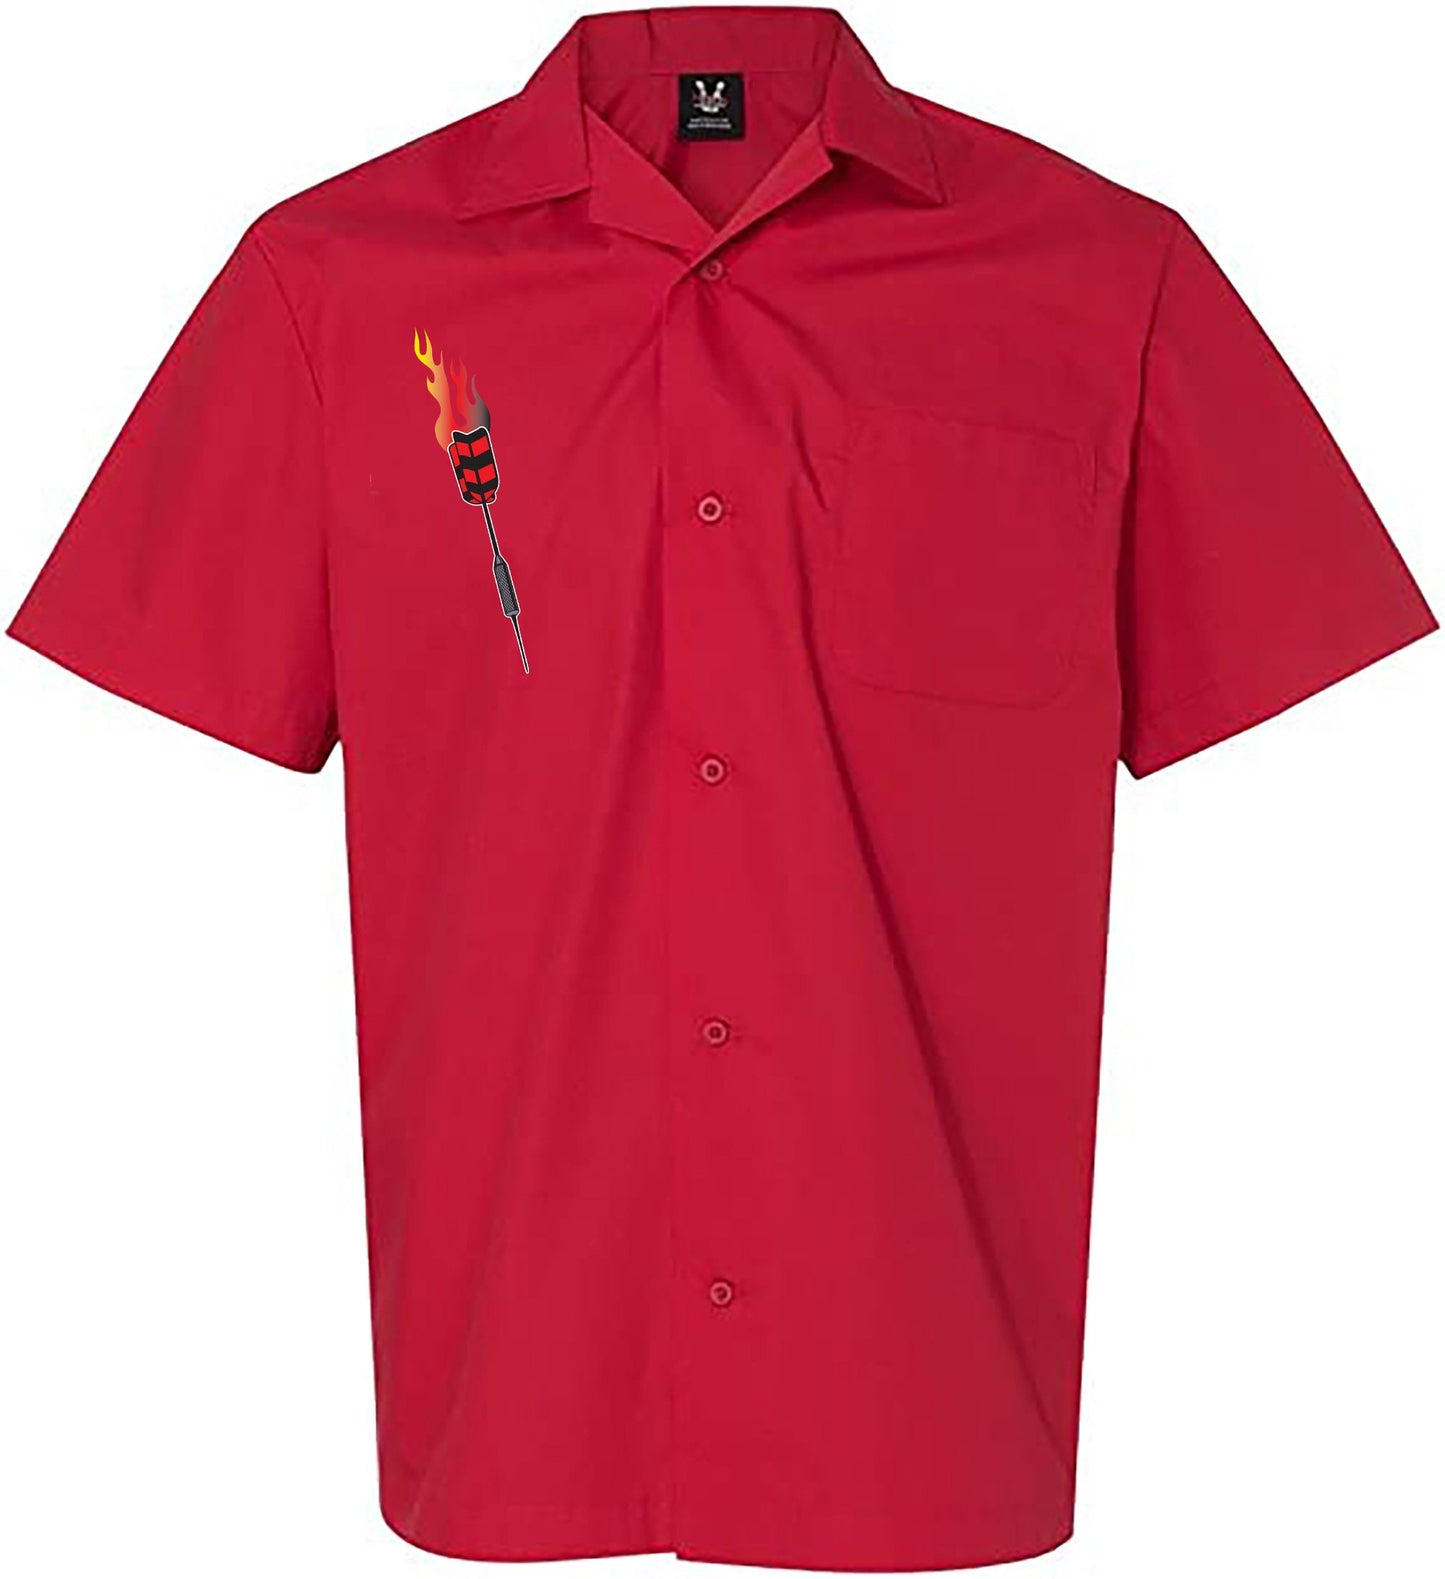 Flaming Darts Classic Retro Bowling Shirt- Vintage Bowler ( Closeout) in multiple colors  - Includes Embroidered Name #234